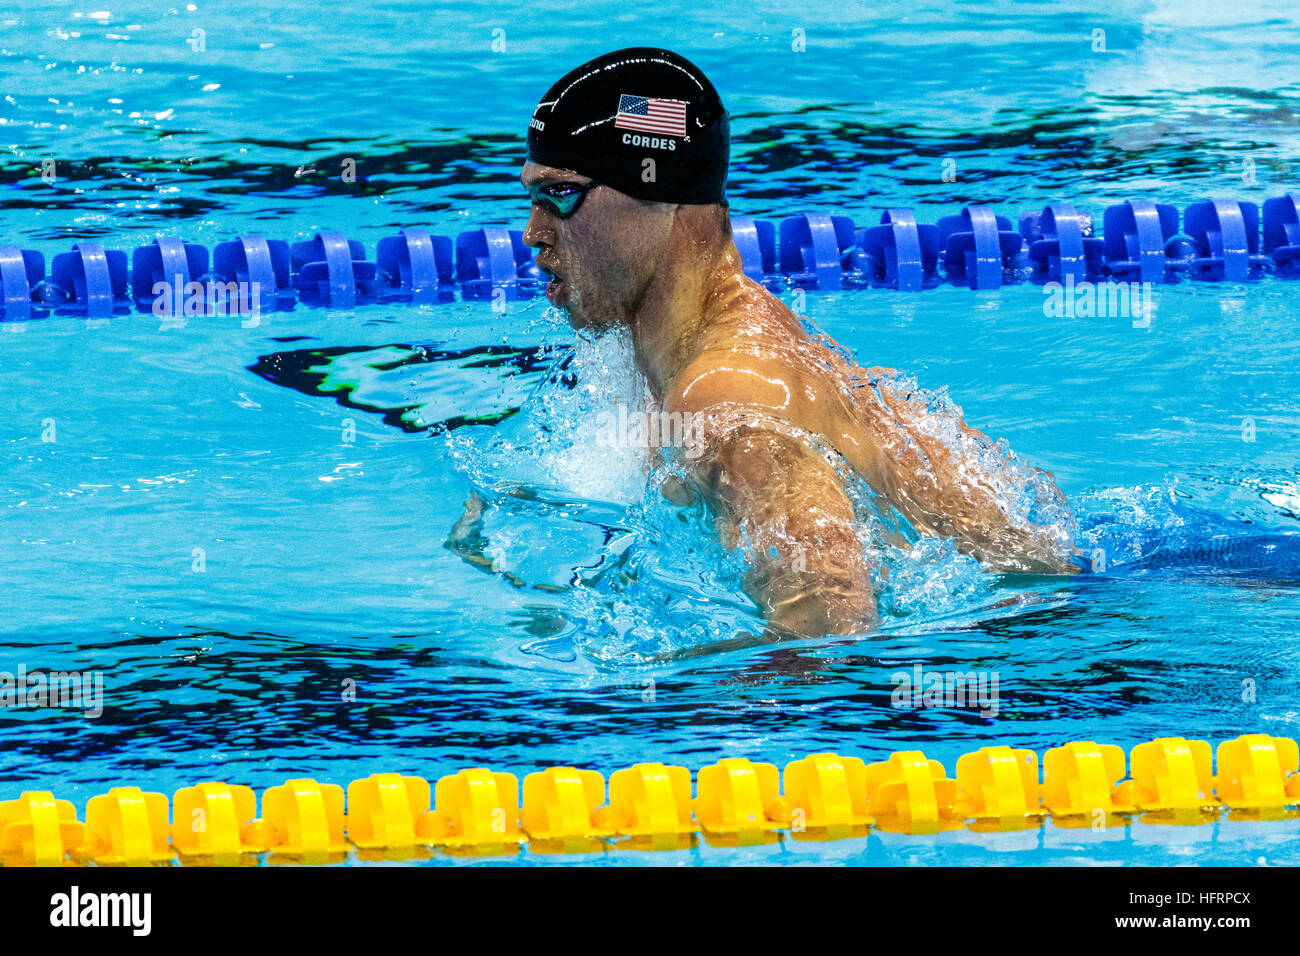 Rio de Janeiro, Brazil. 9 August 2016.   Kevin Cordes (USA) competing in the semifinal of the men's 200m breaststroke at the 2016 Olympic Summer Games Stock Photo